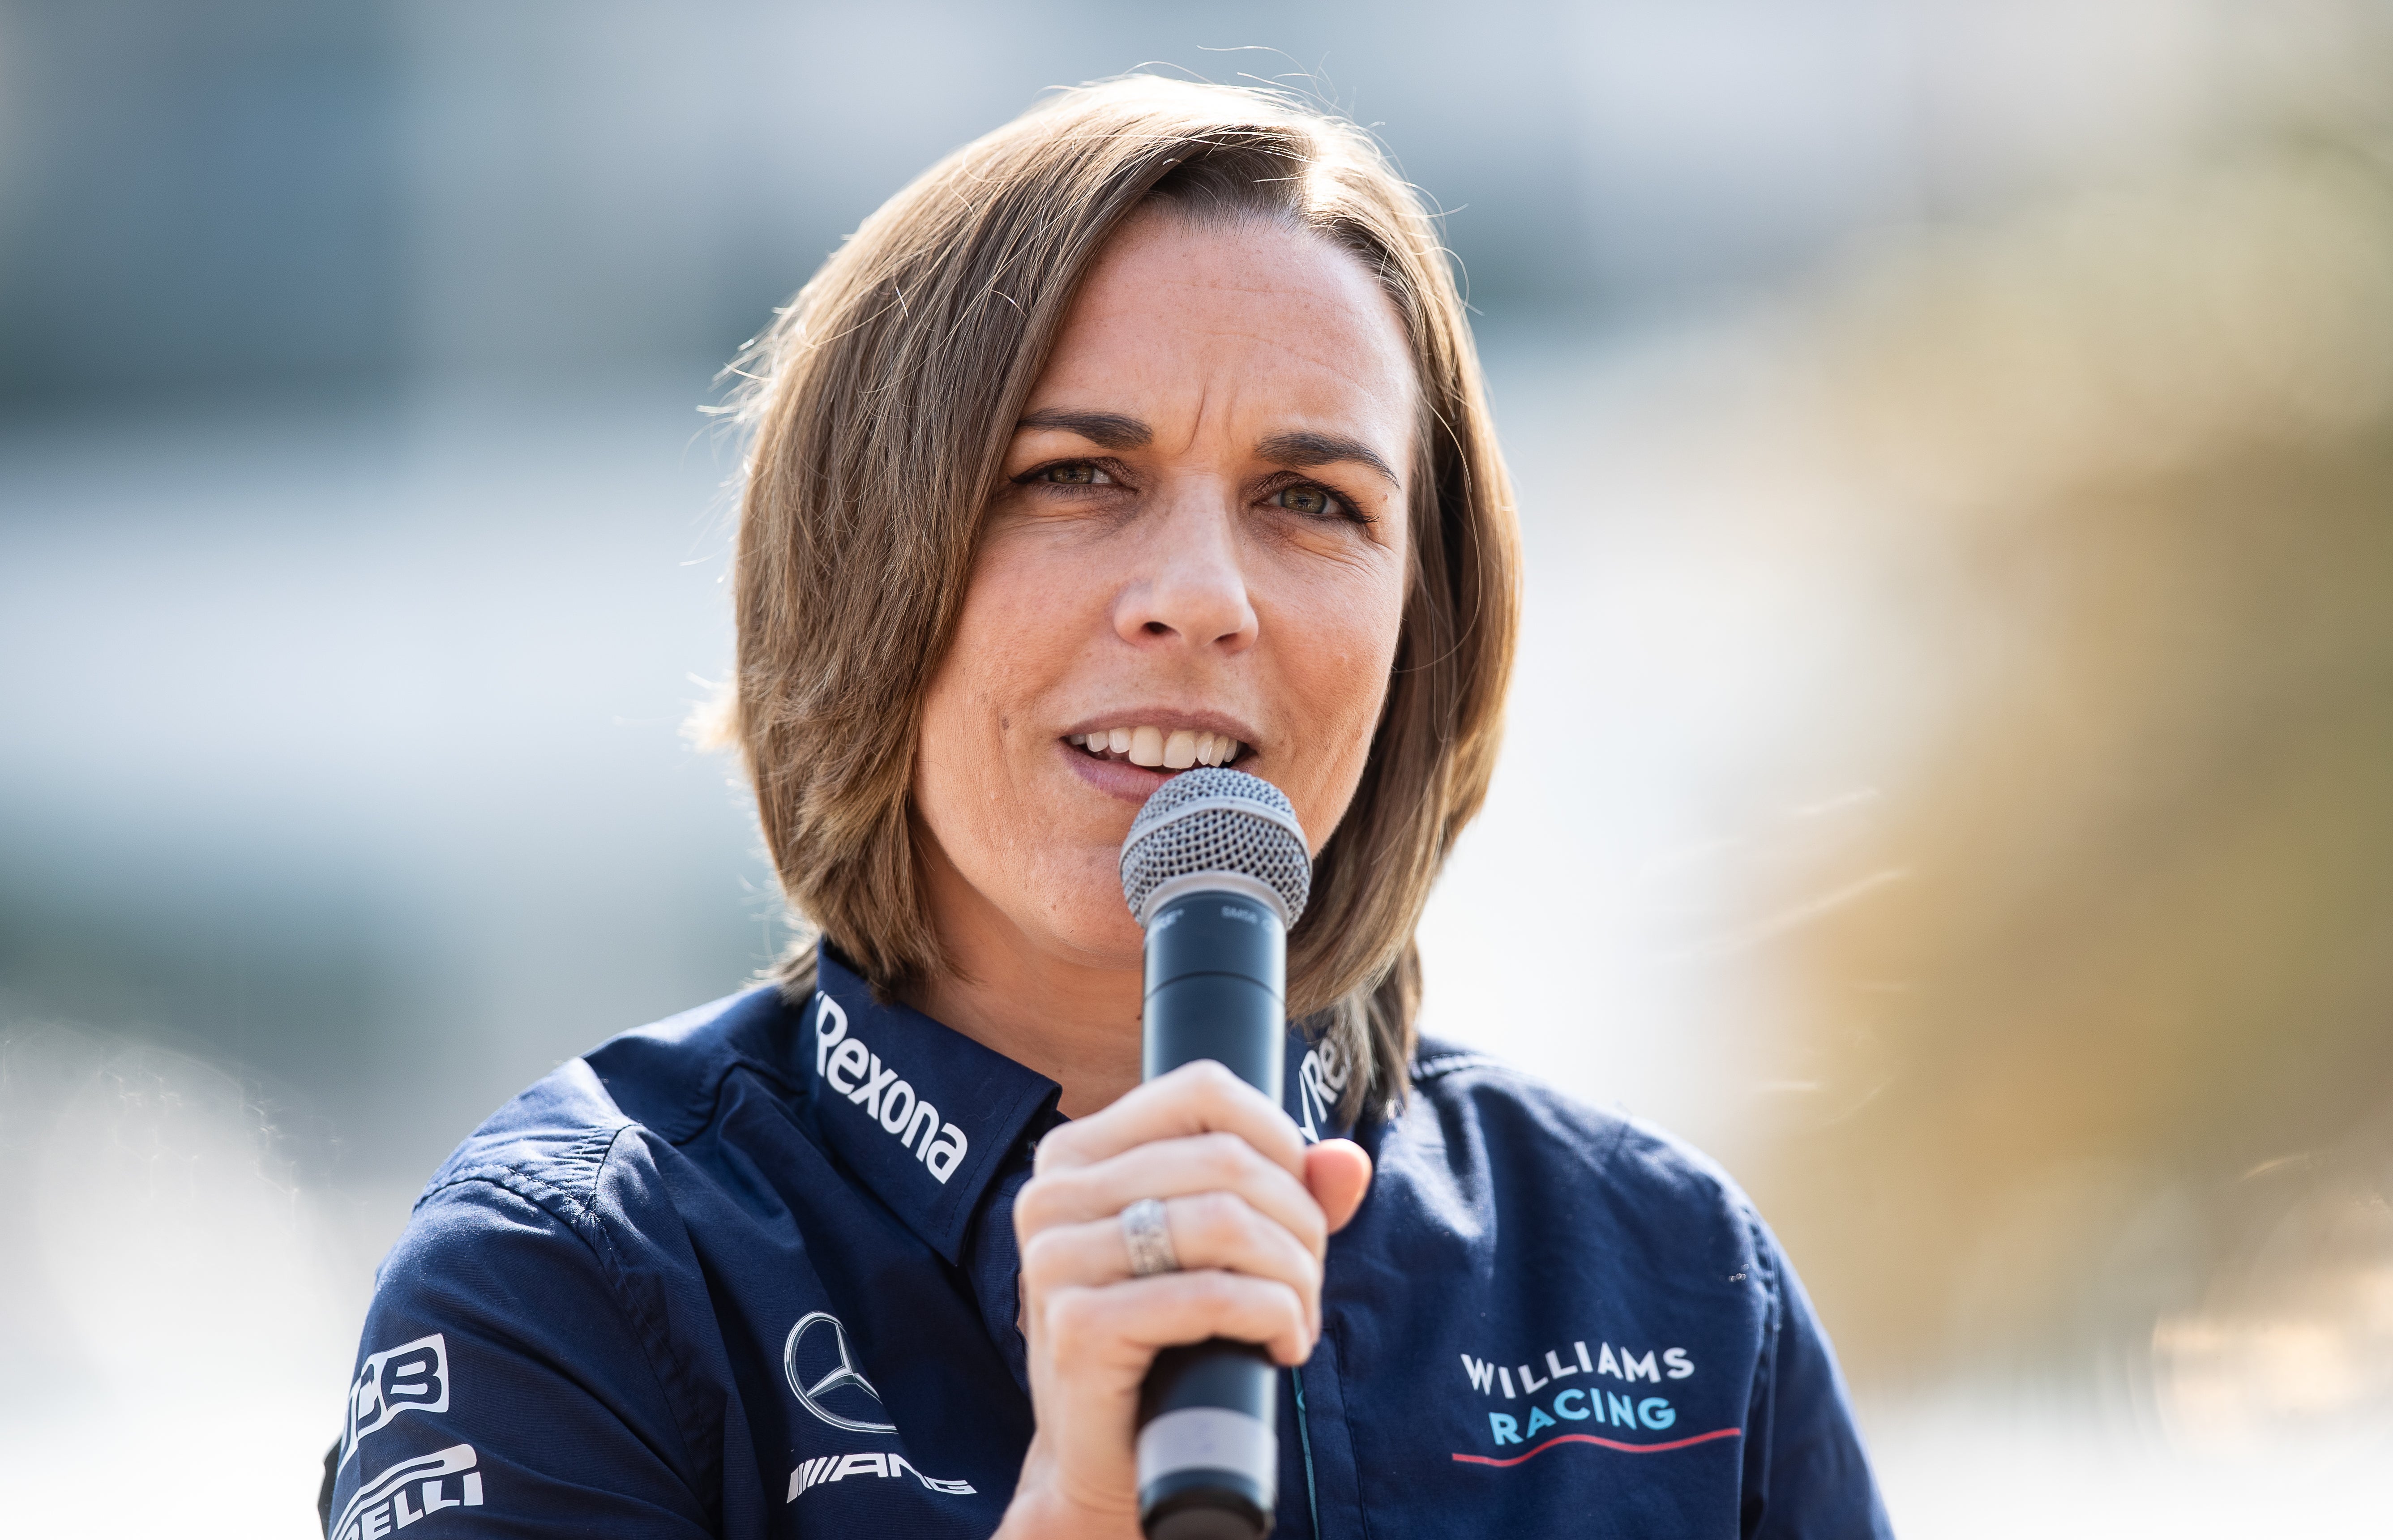 Ex-Williams team principal Claire Williams also gives her views in season six